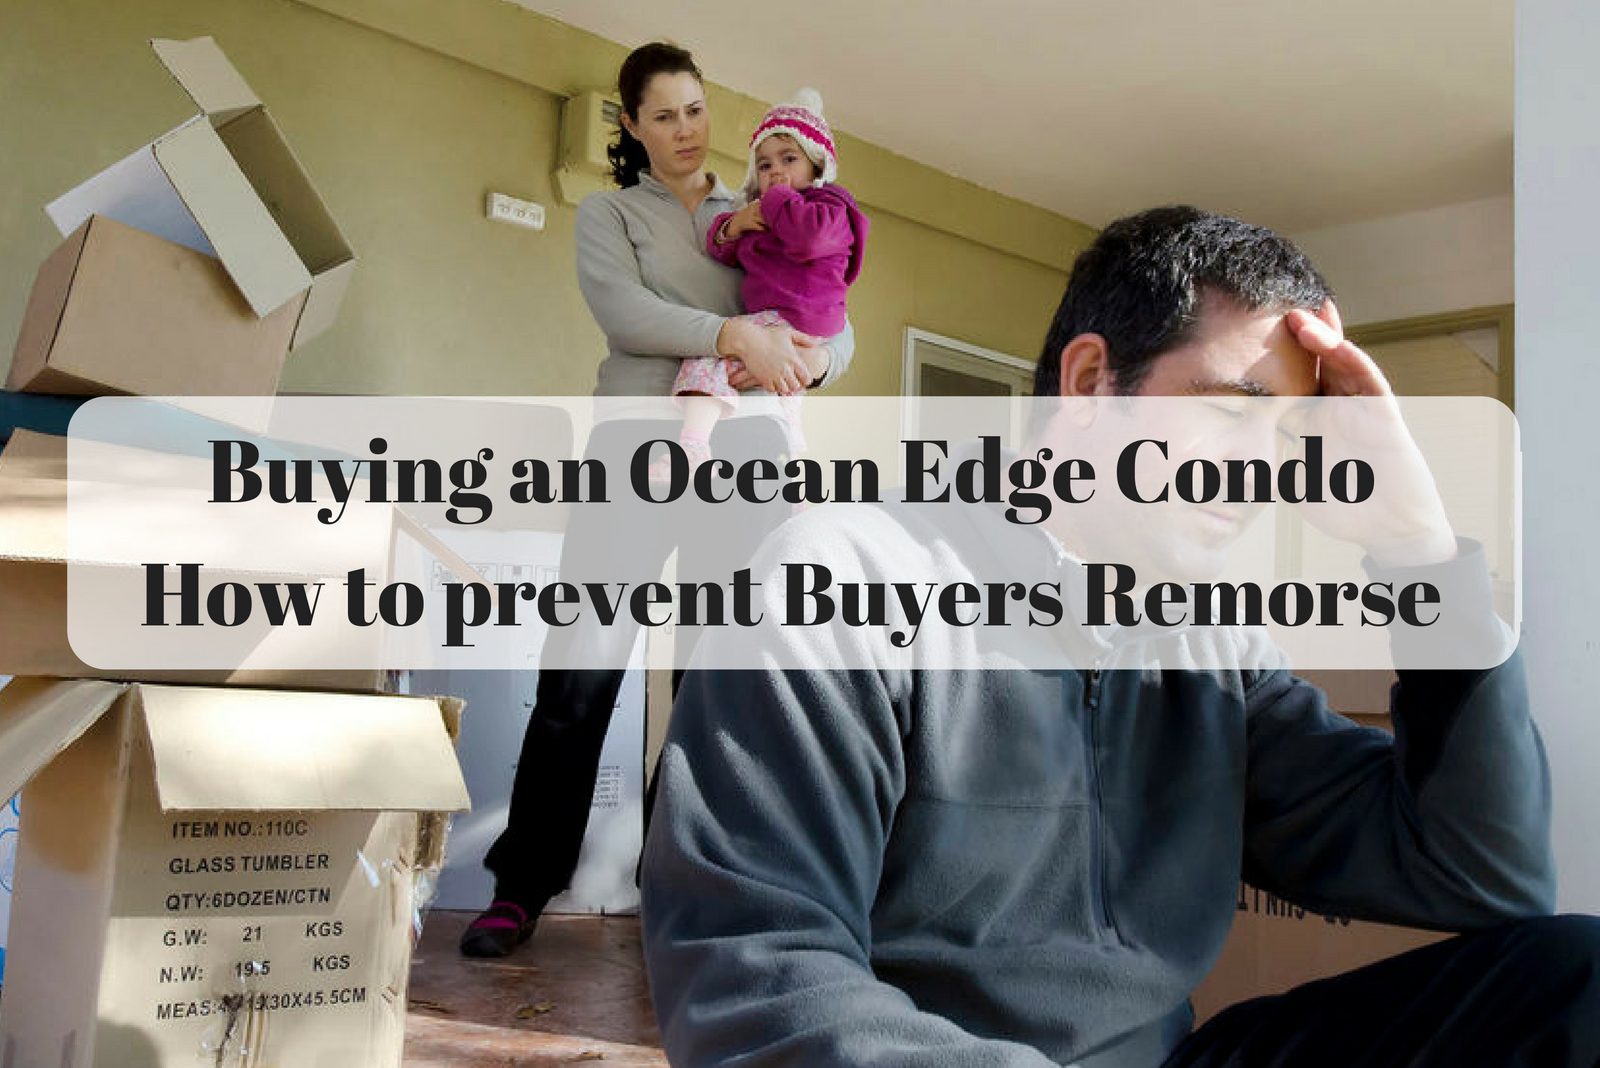 Buying an Ocean Edge Condo: How to Prevent Buyers Remorse